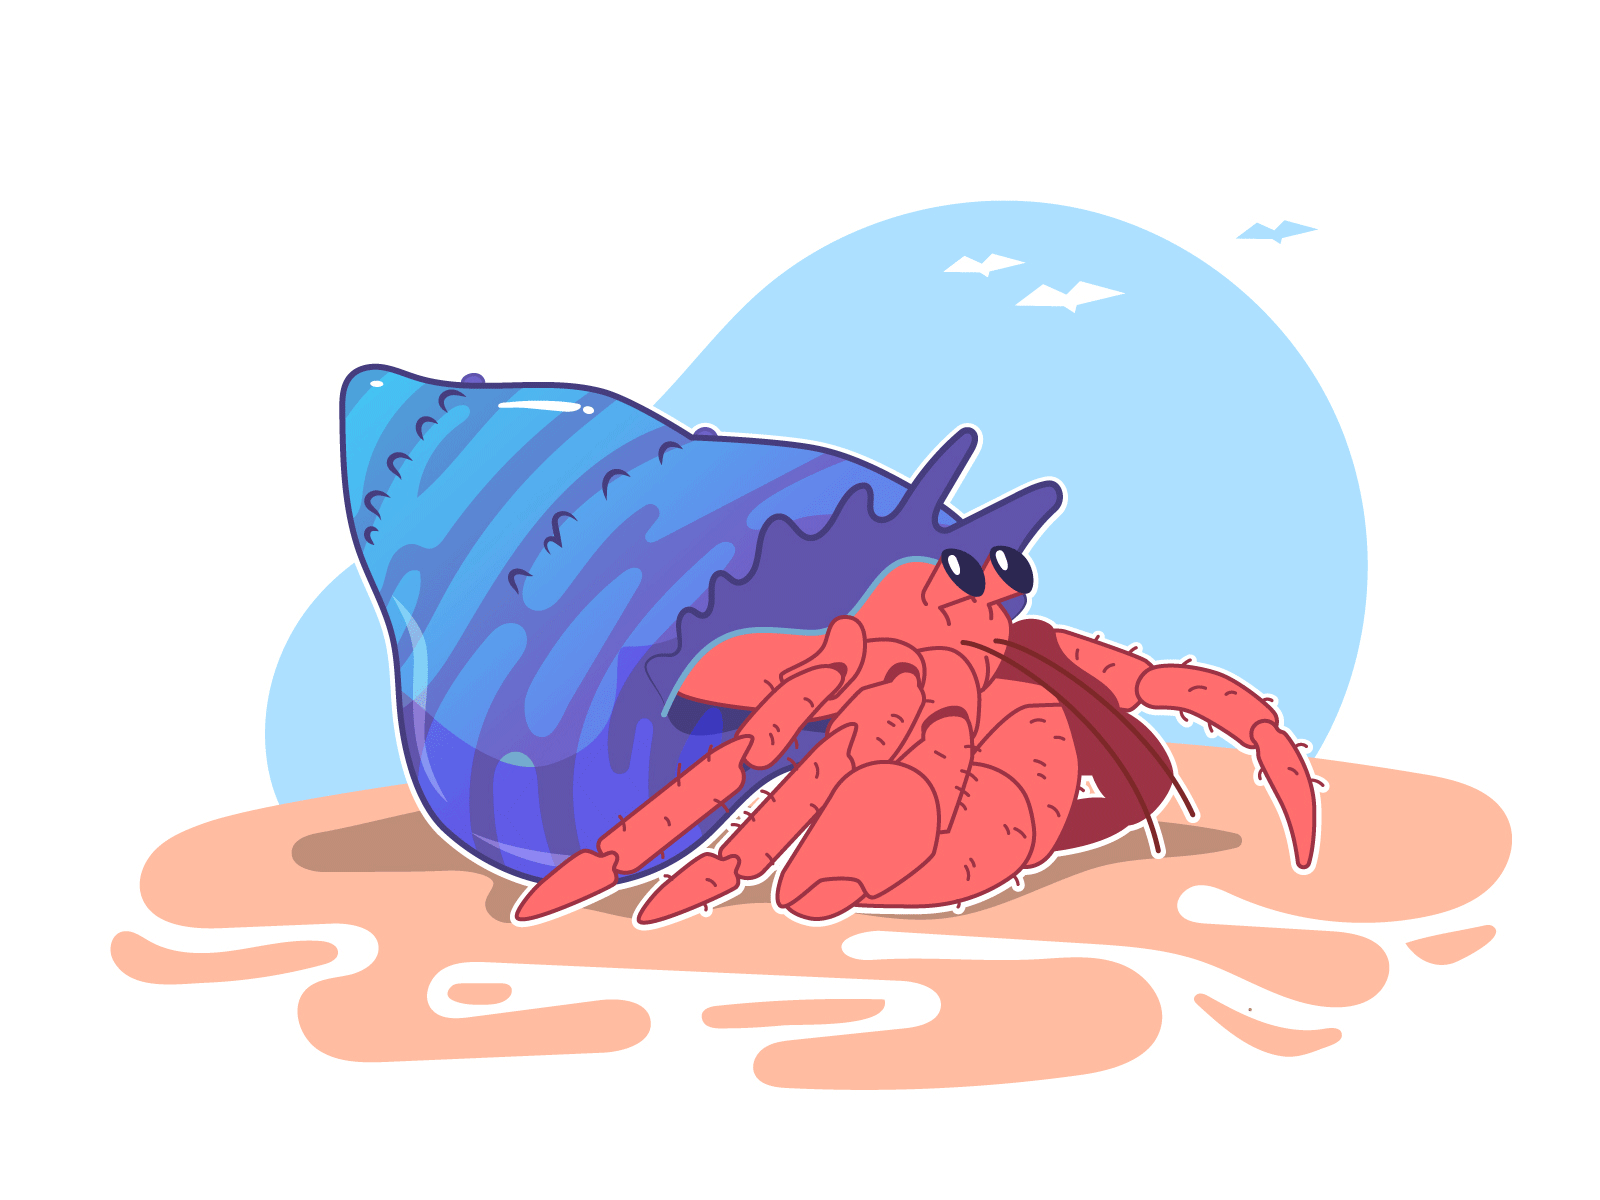 The Secret of the Hermit Crab by Victor Belser on Dribbble